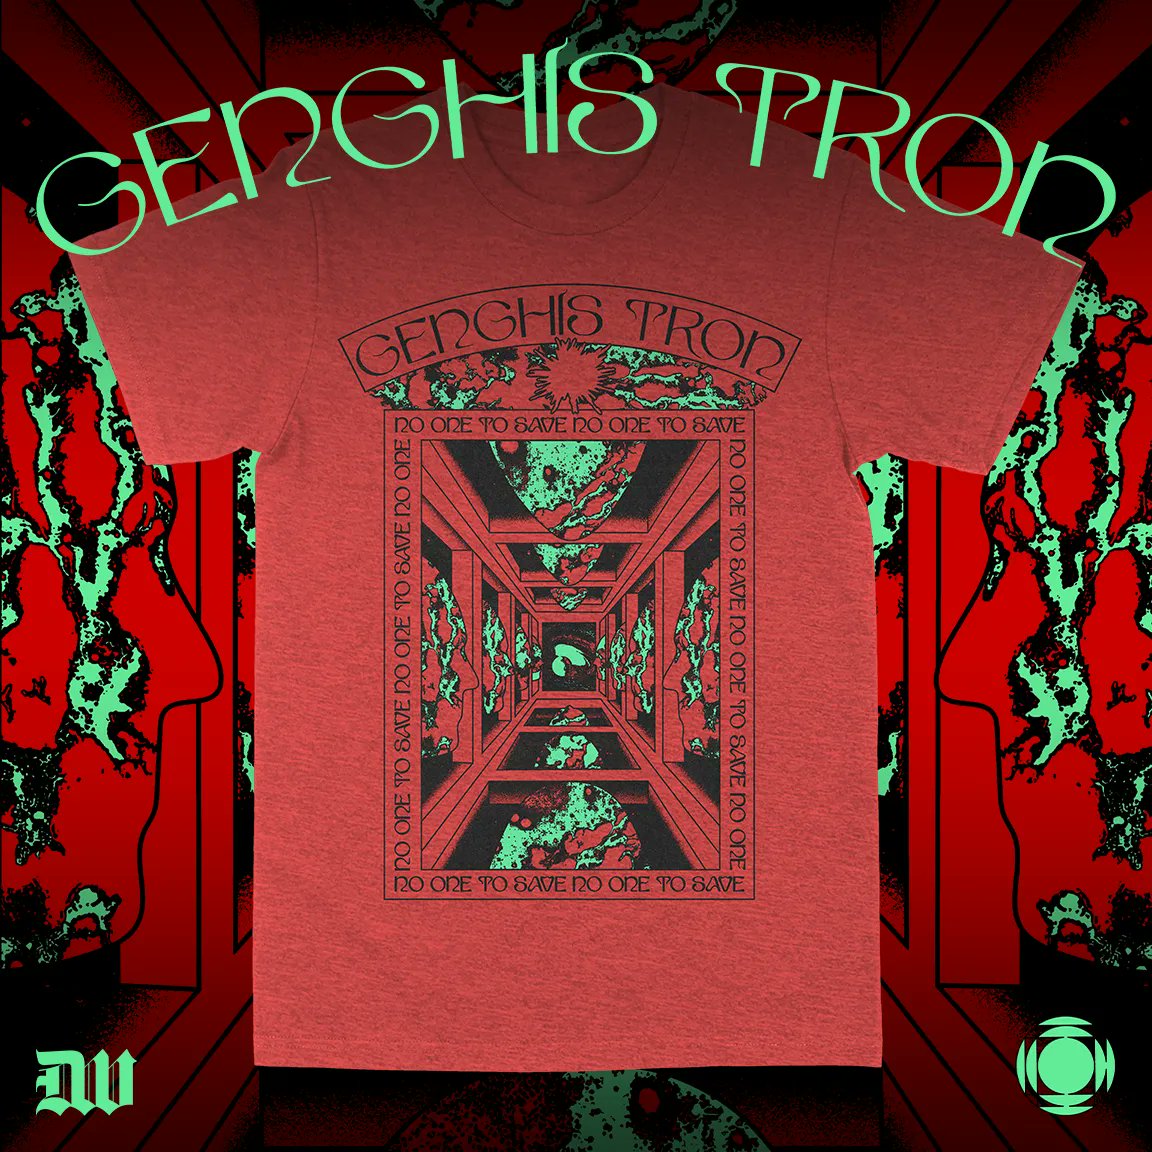 GENGHIS TRON Official Store
Merch & Music: dthw.sh/genghistron

Excited to announce the launch of the new @GenghisTronBand store powered by @deathwishinc & @deathwisheurope. 

#GenghisTron #BandMerch #DeathwishInc #DeathwishEurope #RelapseRecords